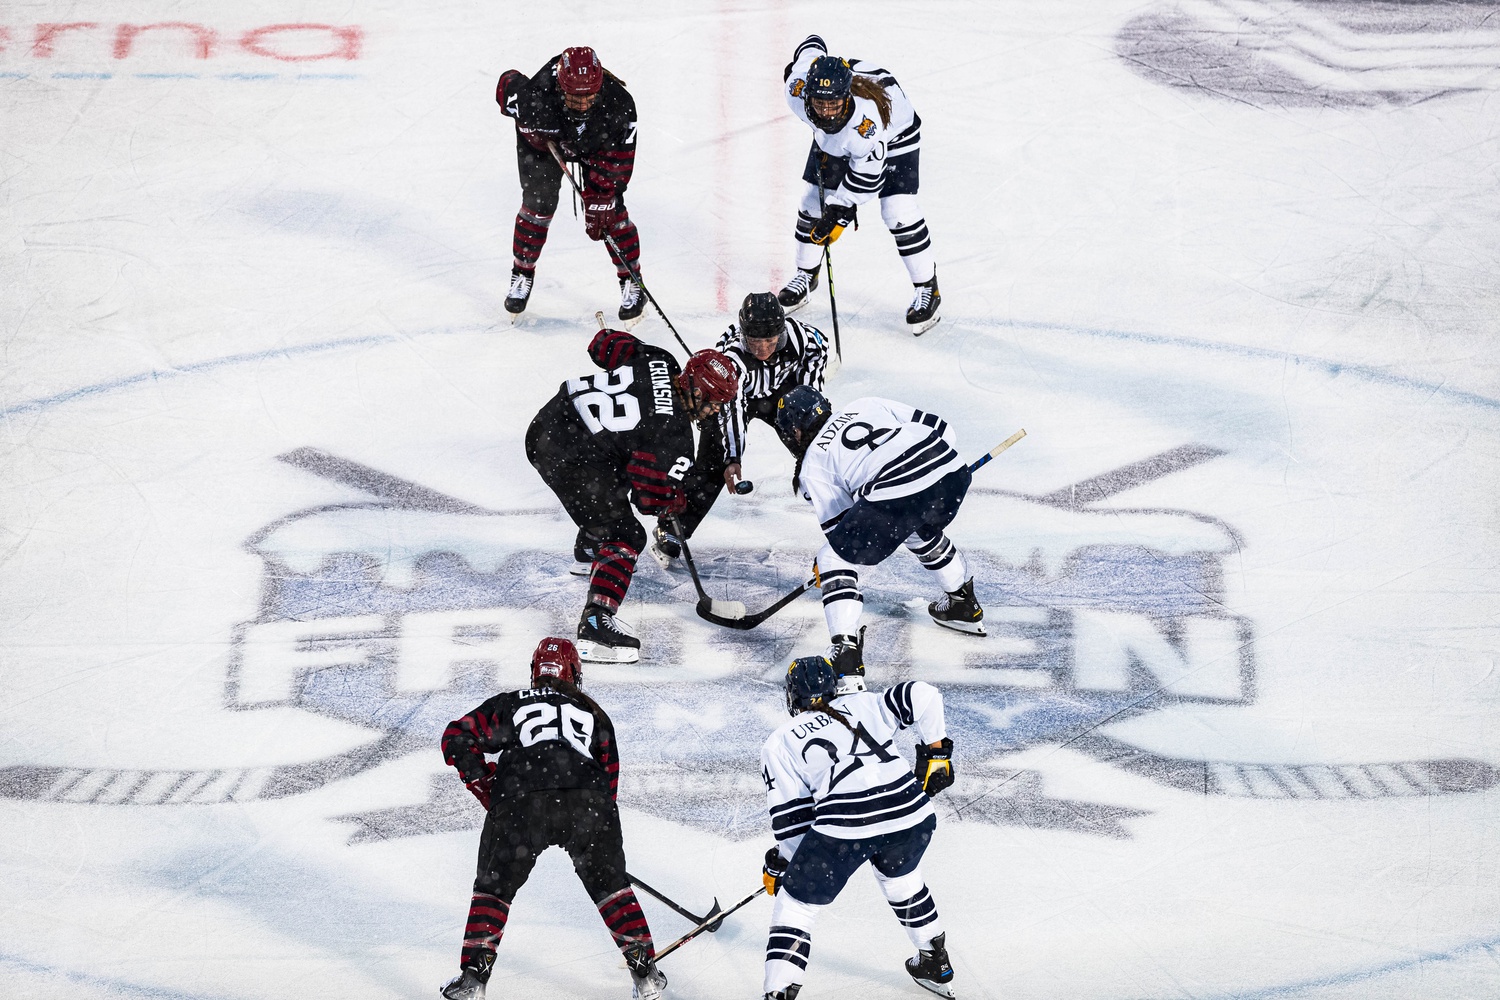 Harvard women's ice hockey faces off with Quinnipiac at the Frozen Fenway game on January 6, 2023.